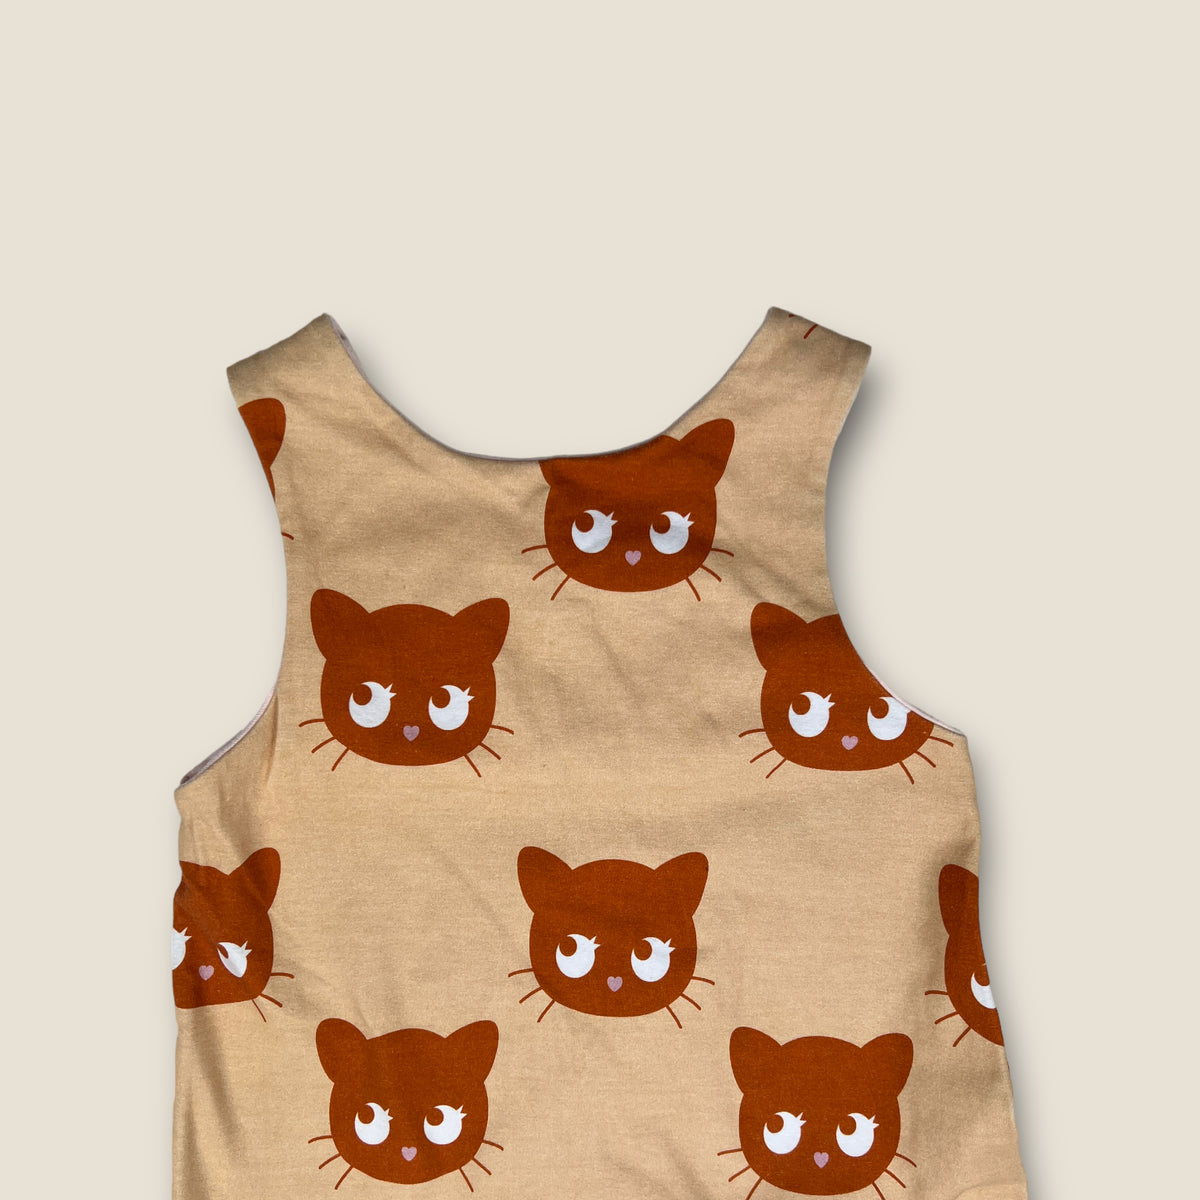 Marmalade Sky Romper size 3-4 years